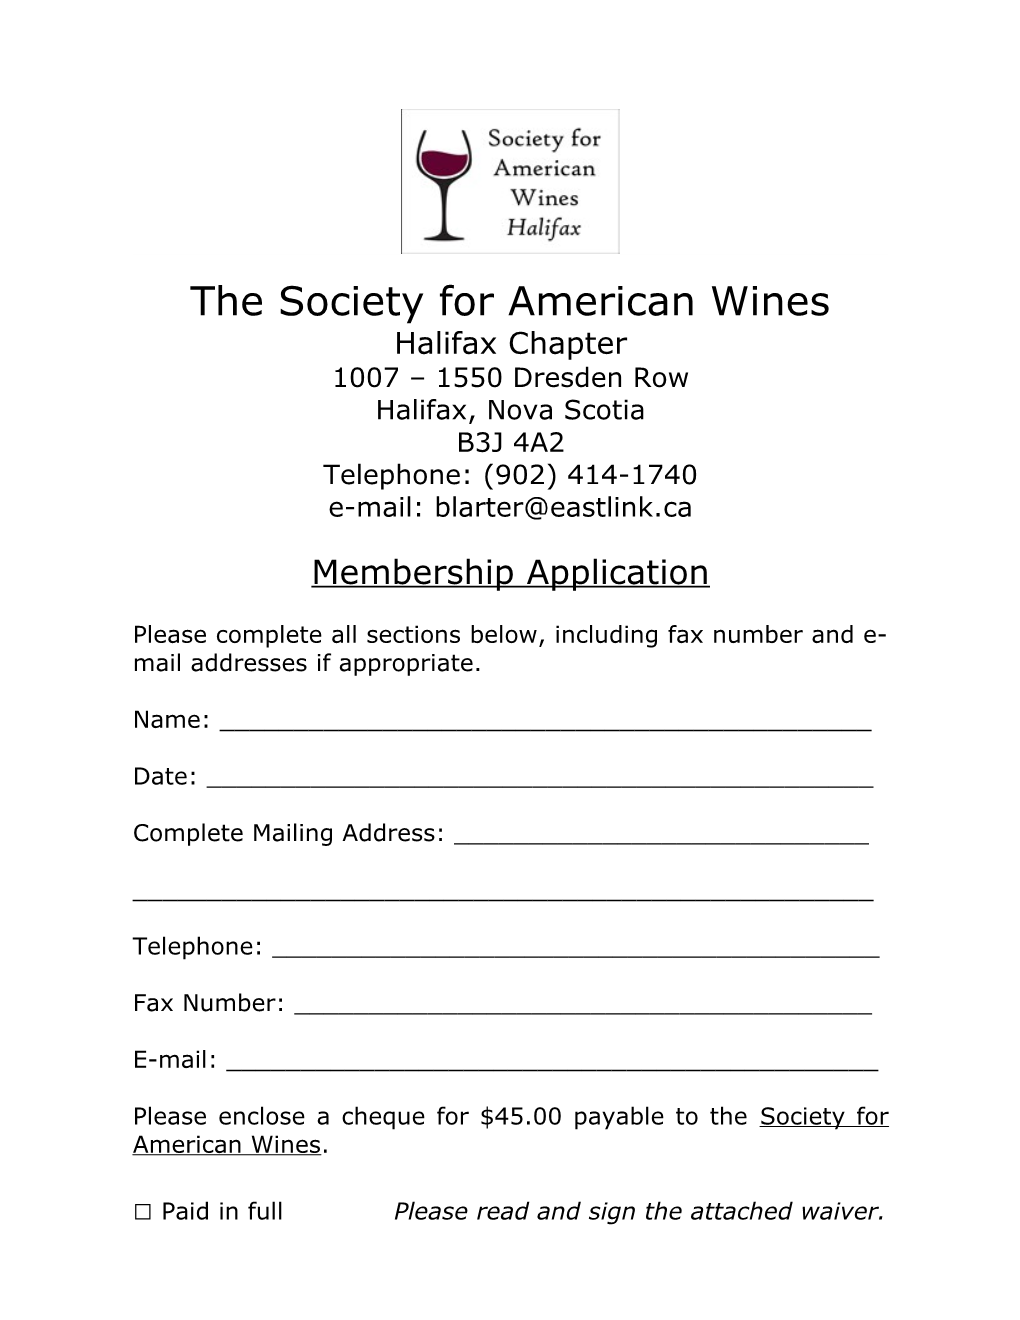 The Society for American Wines